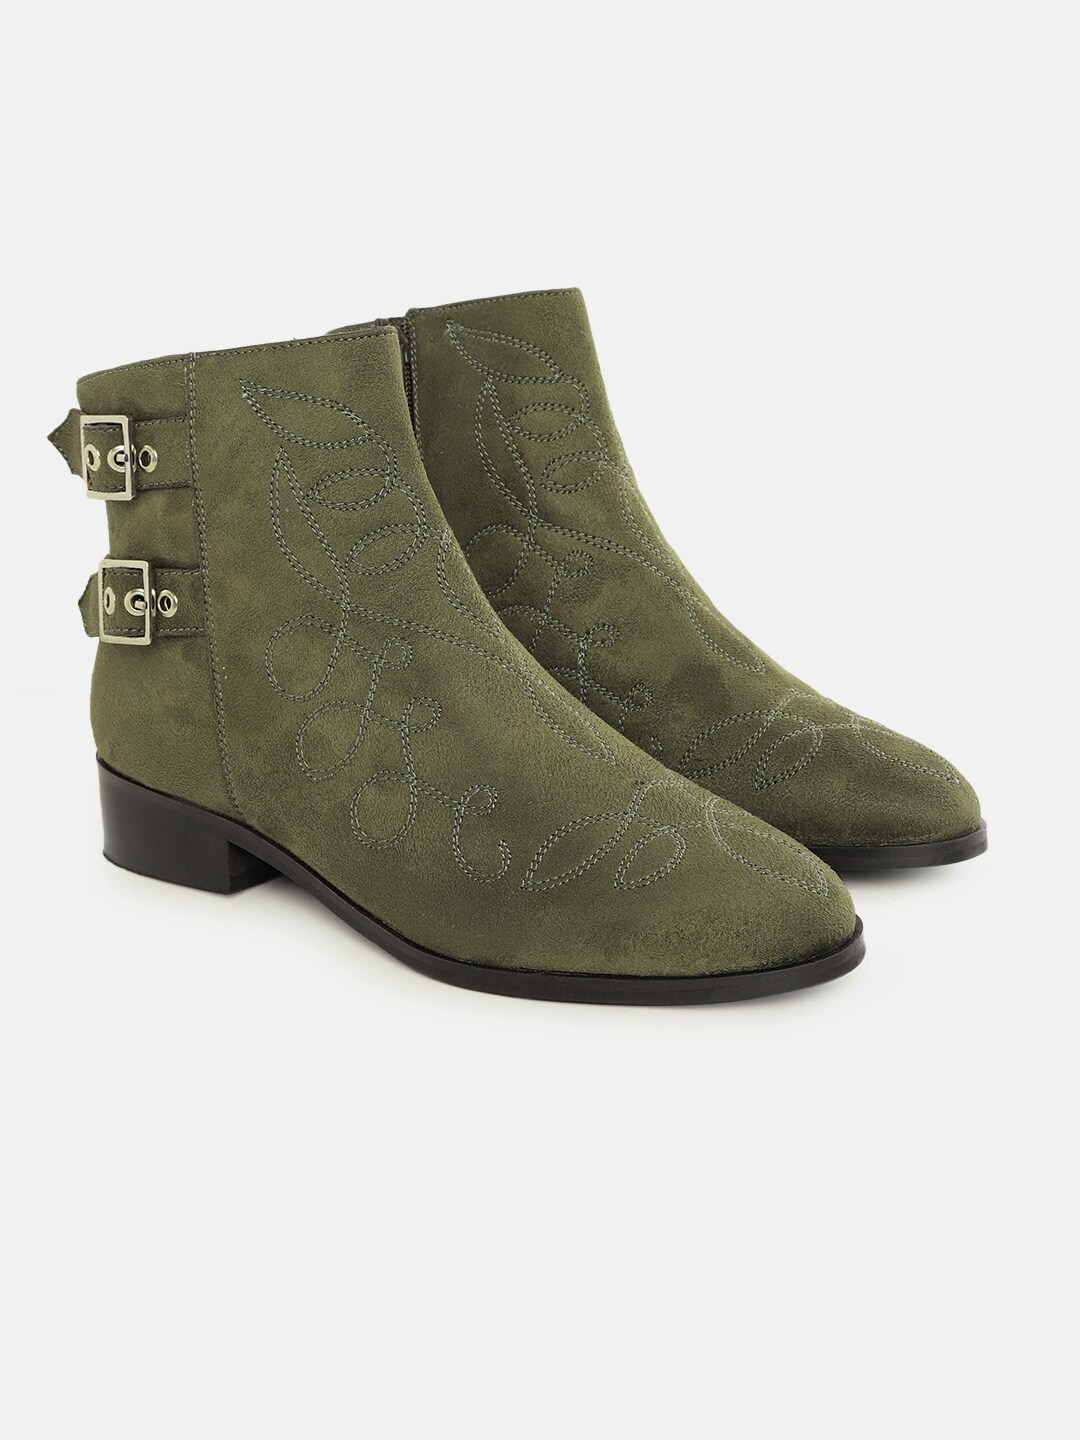 CORSICA Women Olive Green Suede Finish Embroidered Mid-Top Flat Boots Price in India